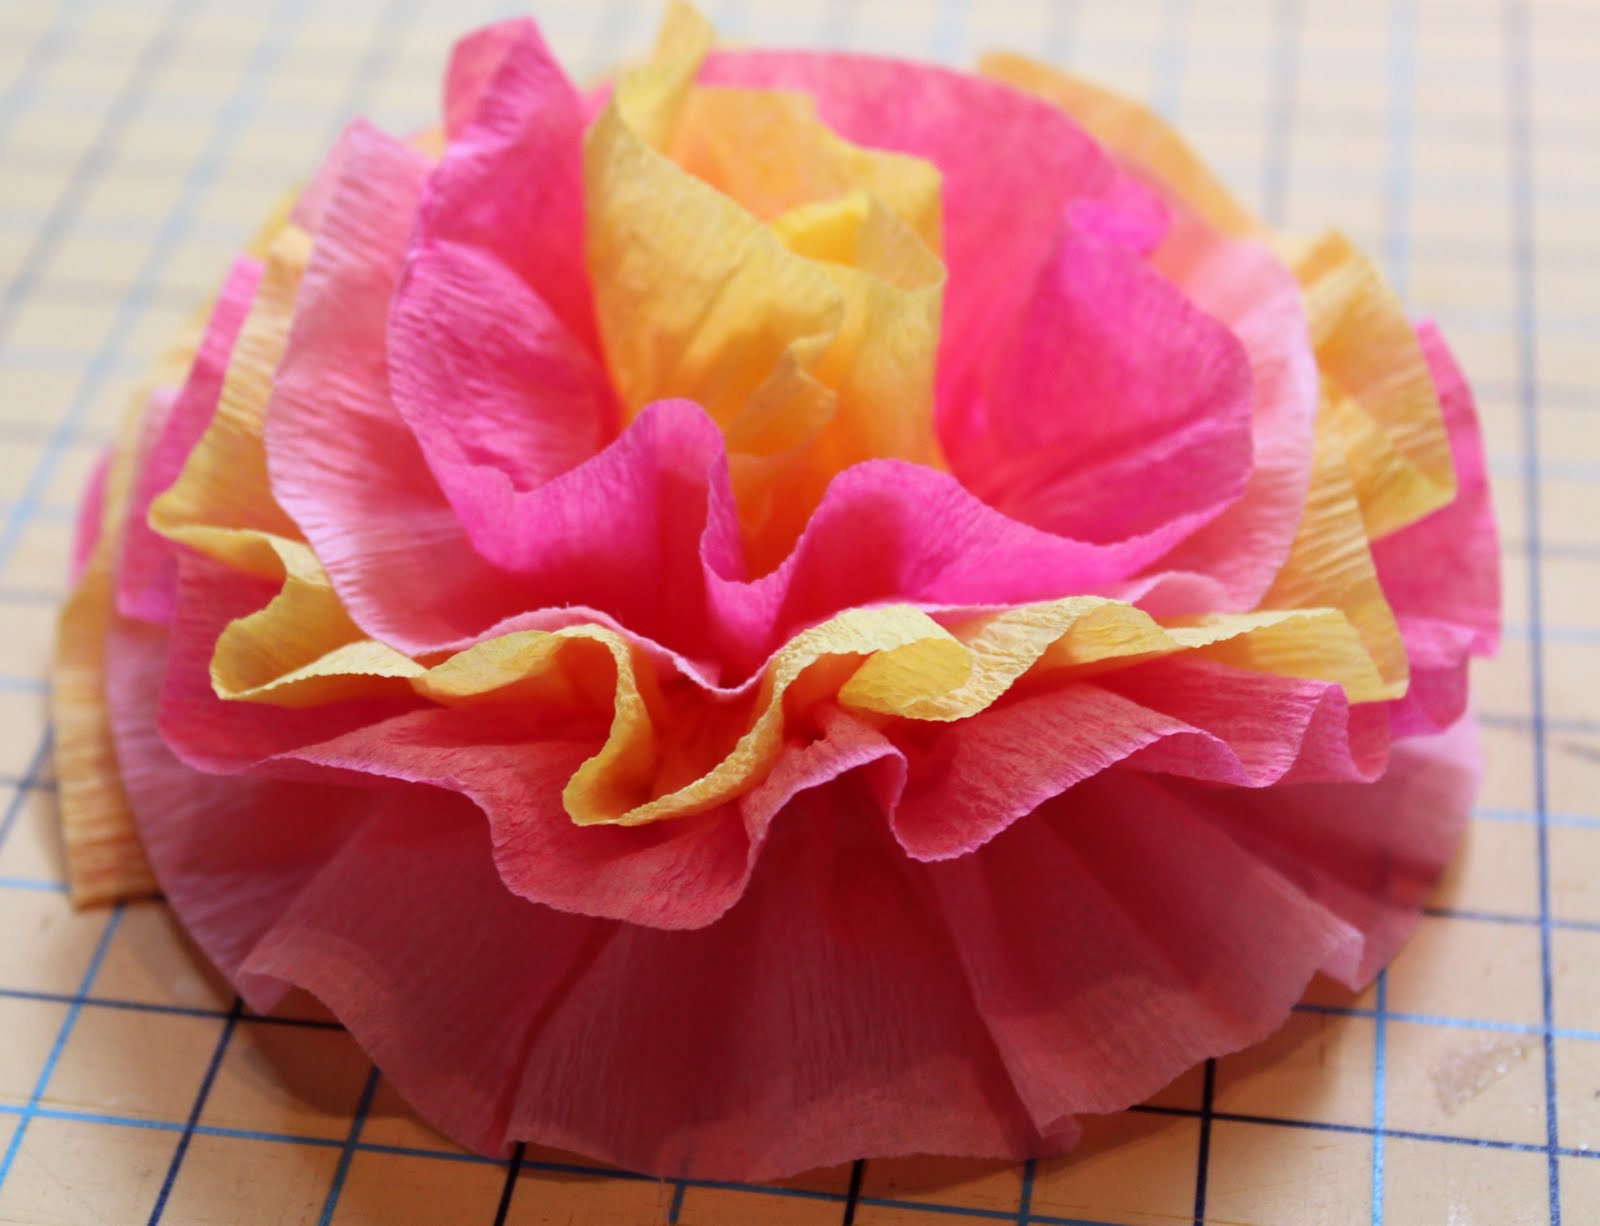 Crepe Paper Flowers - The Cottage Mama